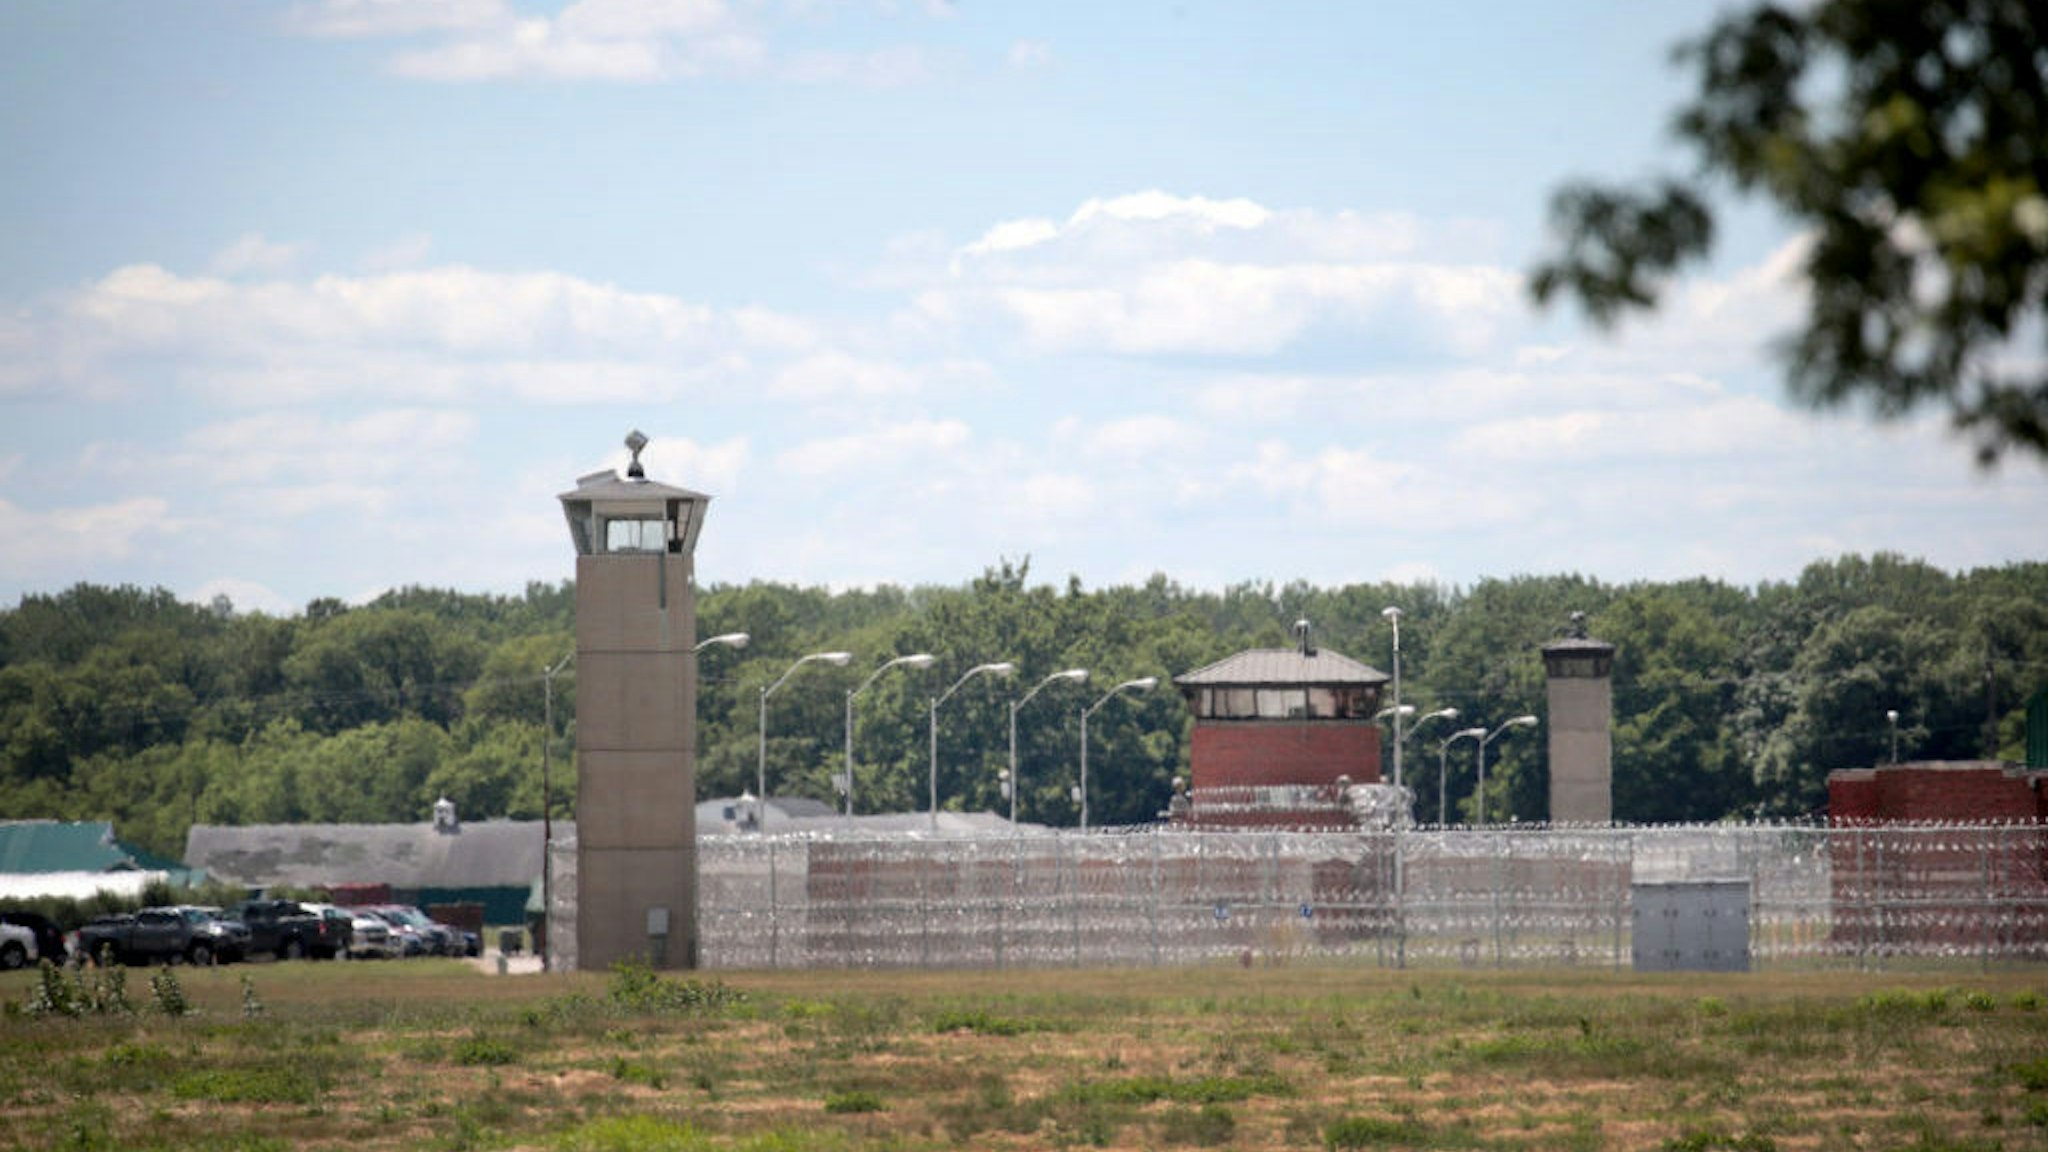 TERRE HAUTE, INDIANA - JULY 13: A guard tower sits along a security fence at the Federal Correctional Complex where Daniel Lewis Lee is scheduled to be executed on July 13, 2020 in Terre Haute, Indiana. Lee was convicted and sentenced to die for the 1996 killings in Arkansas of gun dealer William Mueller, his wife Nancy, and her 8-year-old daughter Sarah. He is scheduled to be the first federal prisoner put to death since 2003. (Photo by Scott Olson/Getty Images)